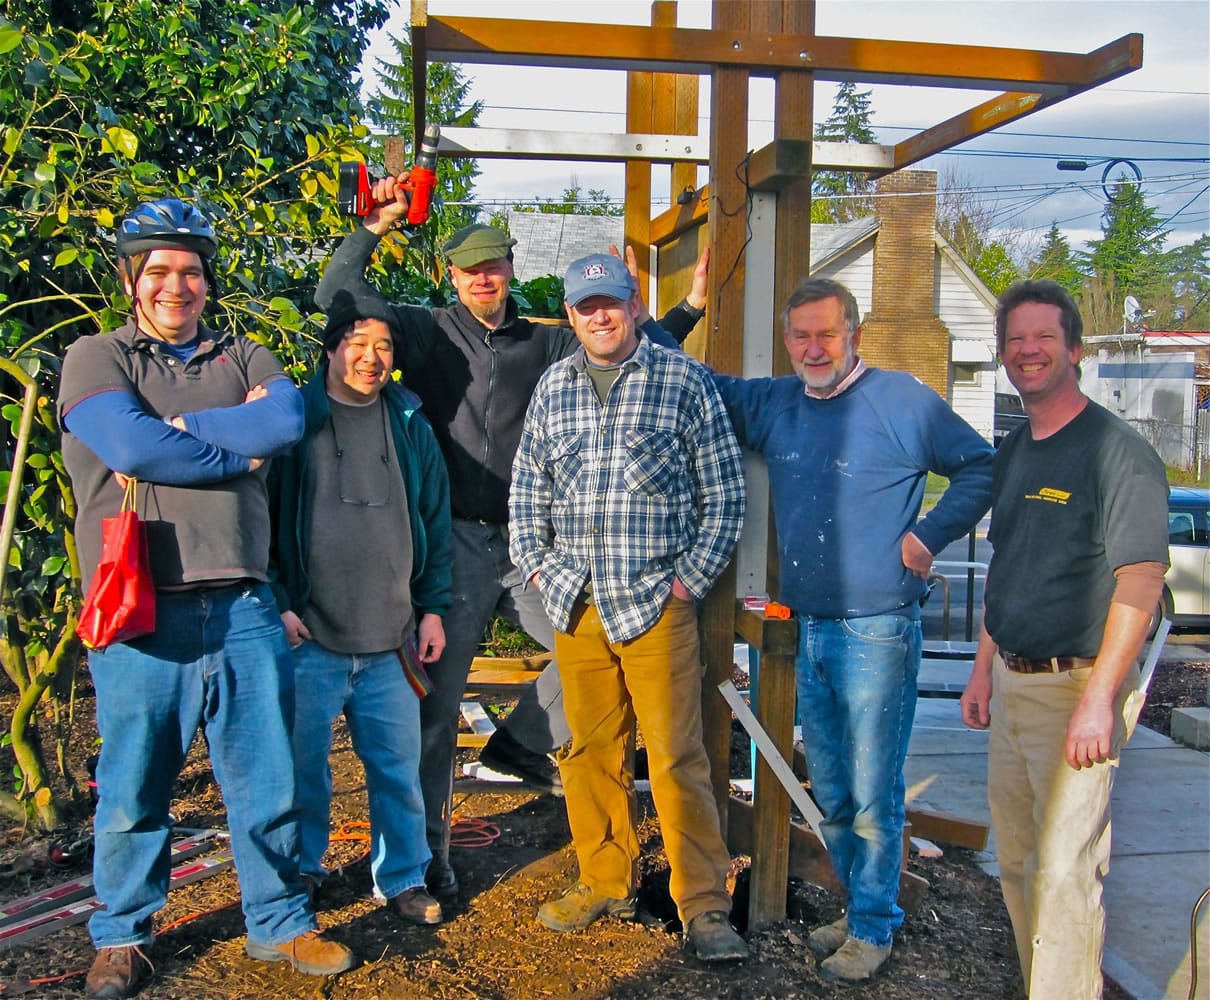 Lincoln: Volunteers -- including, from left, Arvonn Tully, David Tang, Quentin Welch, Sean Evans, Richard Rystrom and Bob Adams -- are building a community bulletin board at Latte Da Coffeehouse and Wine Bar in Vancouver.